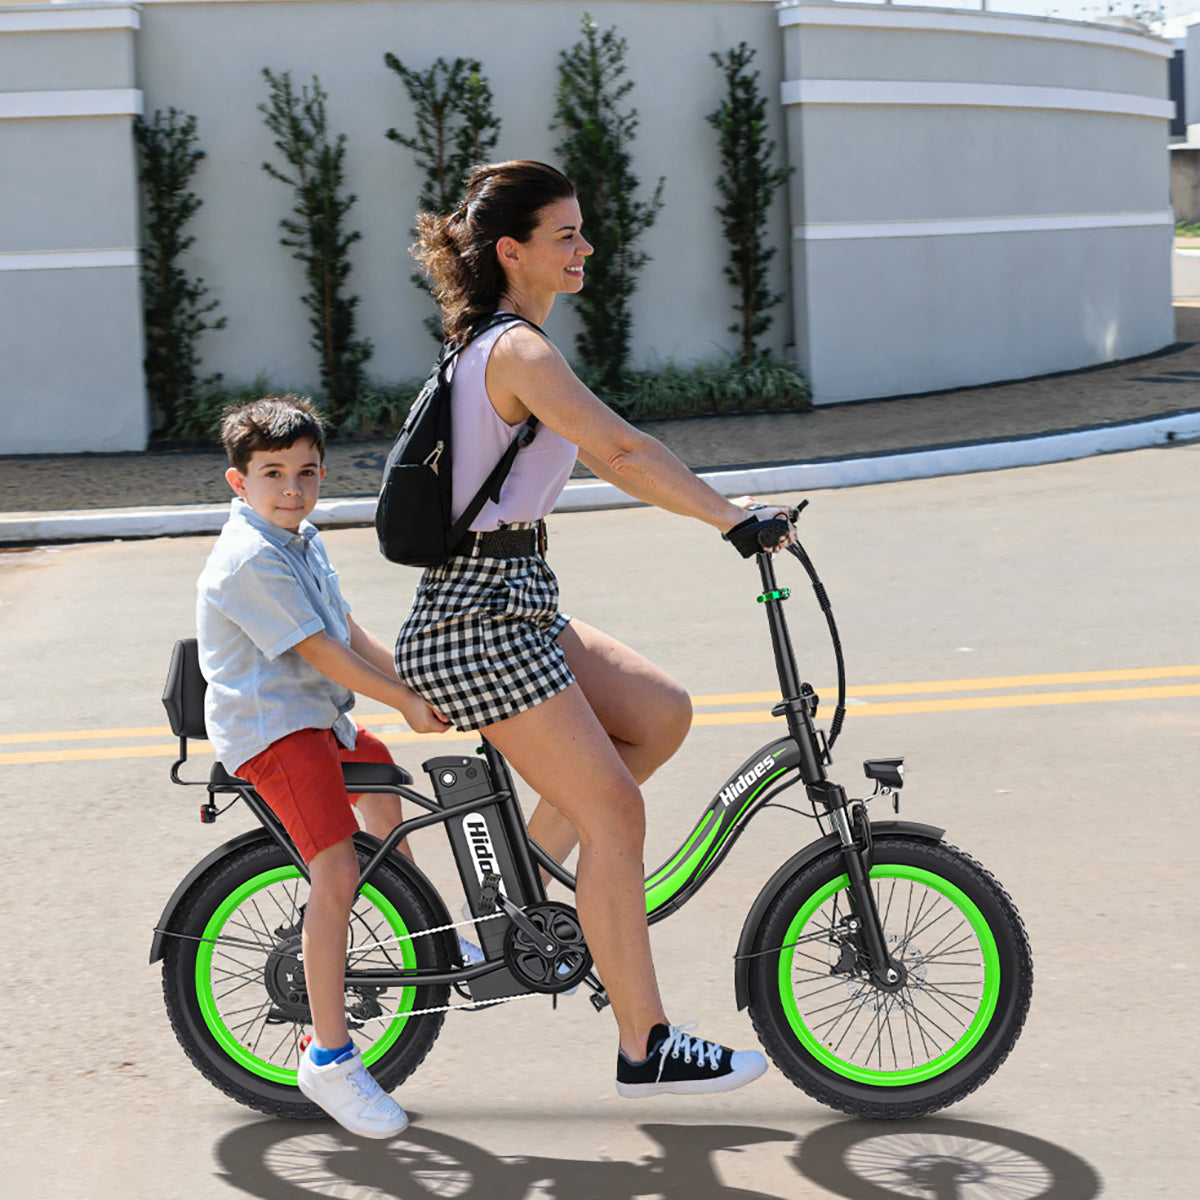 Hidoes C1 electric bike with passenger seat